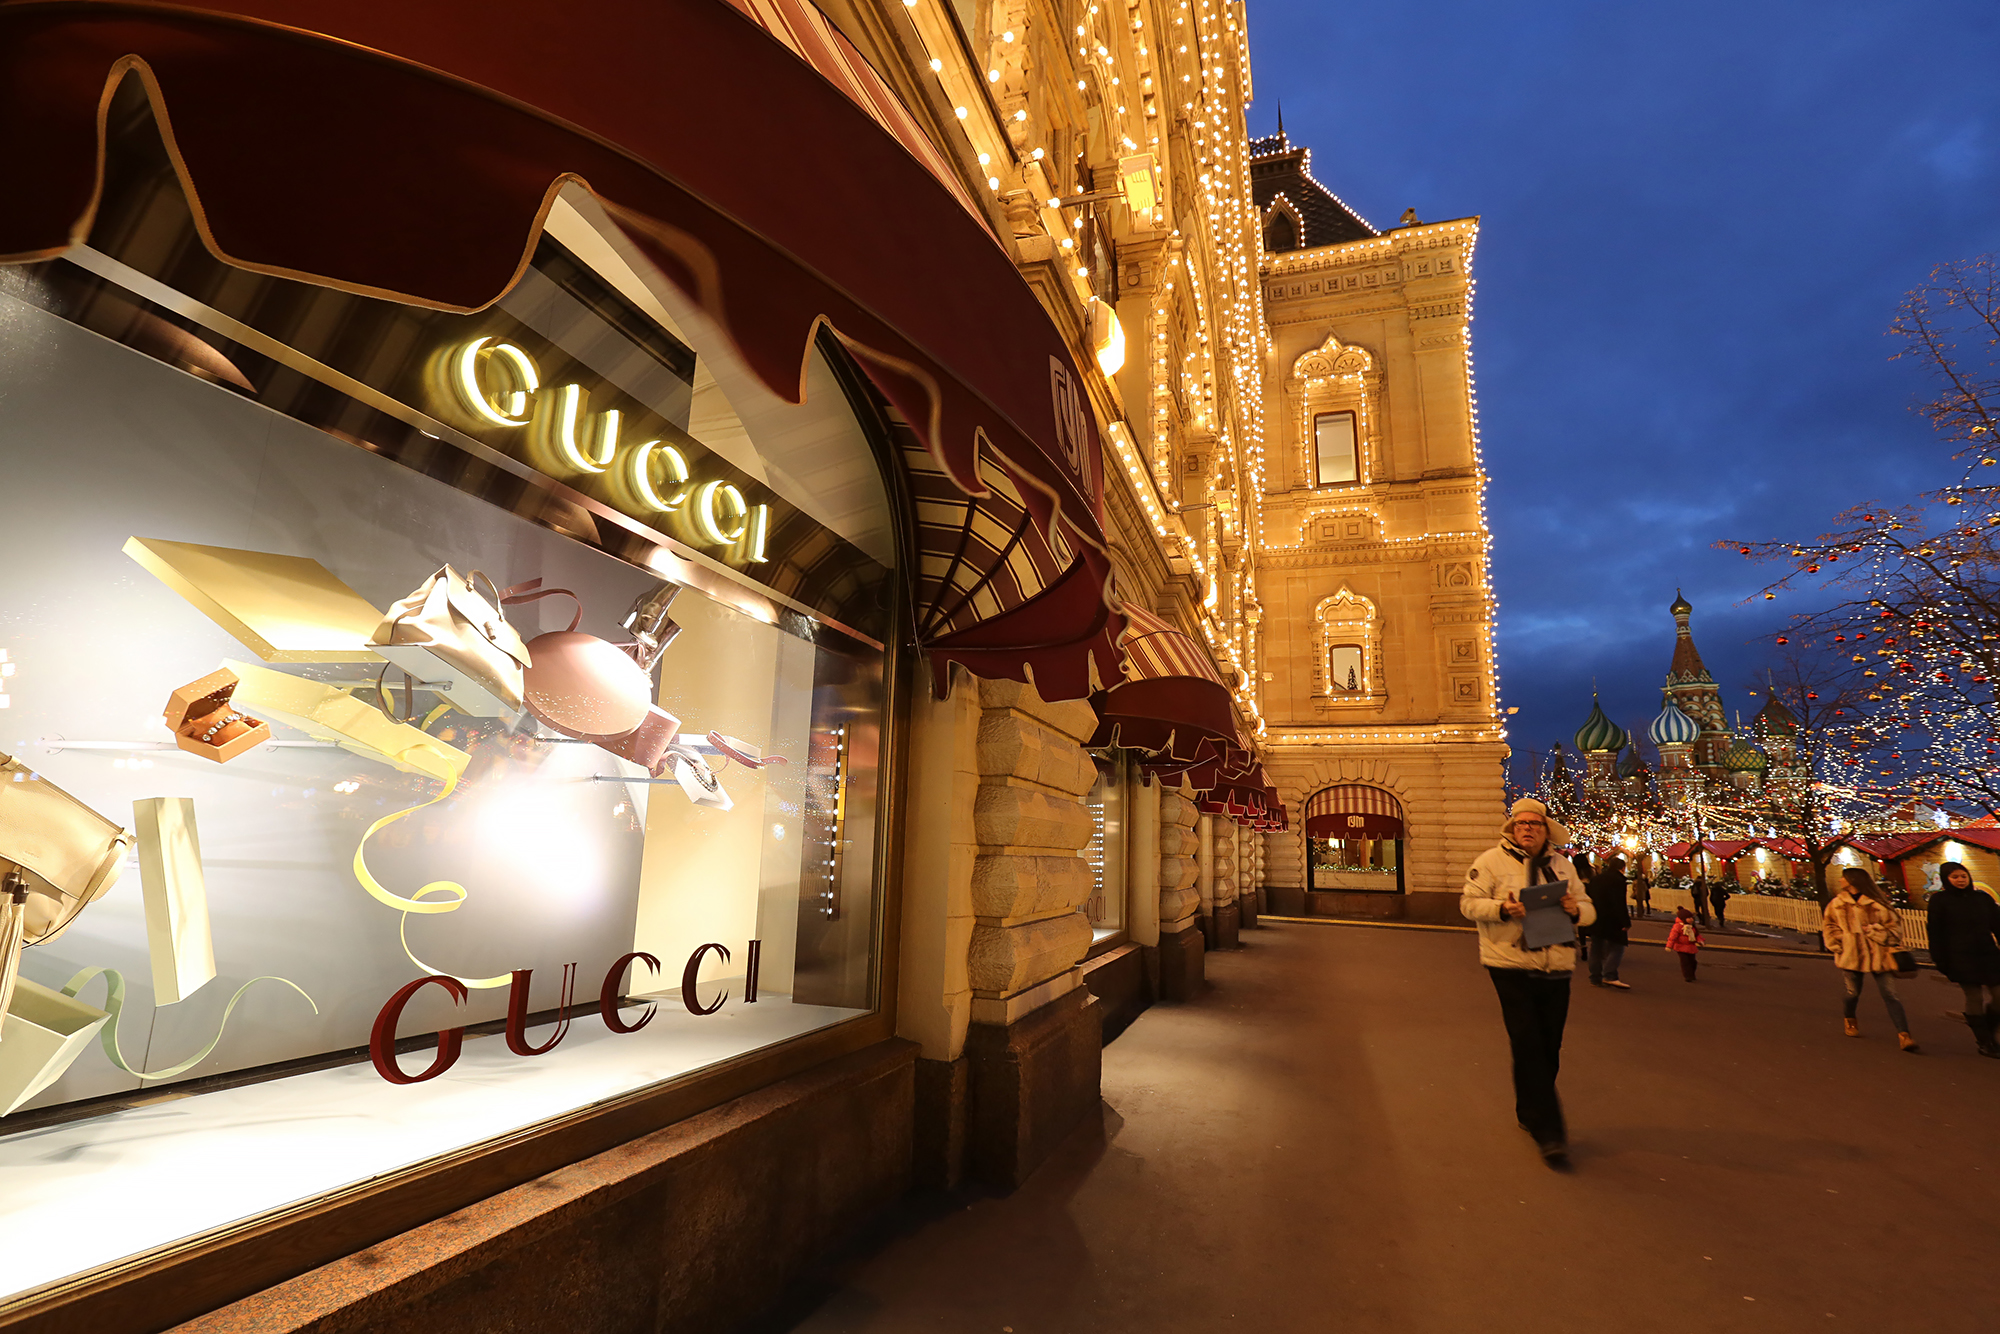 Pedestrians pass a display of Gucci luxury products, a unit of Kering SA, in the windows of the GUM department store on Red Square in Moscow, Russia, on Monday, Dec. 22, 2014. The ruble's rout, sparked by falling oil prices and sanctions imposed on businesses including OAO Sberbank, prompted Russians to begin buying luxury goods from Porsche sports cars to Tiffany rings to preserve the value of their savings. Photographer: Andrey Rudakov/Bloomberg via Getty Images